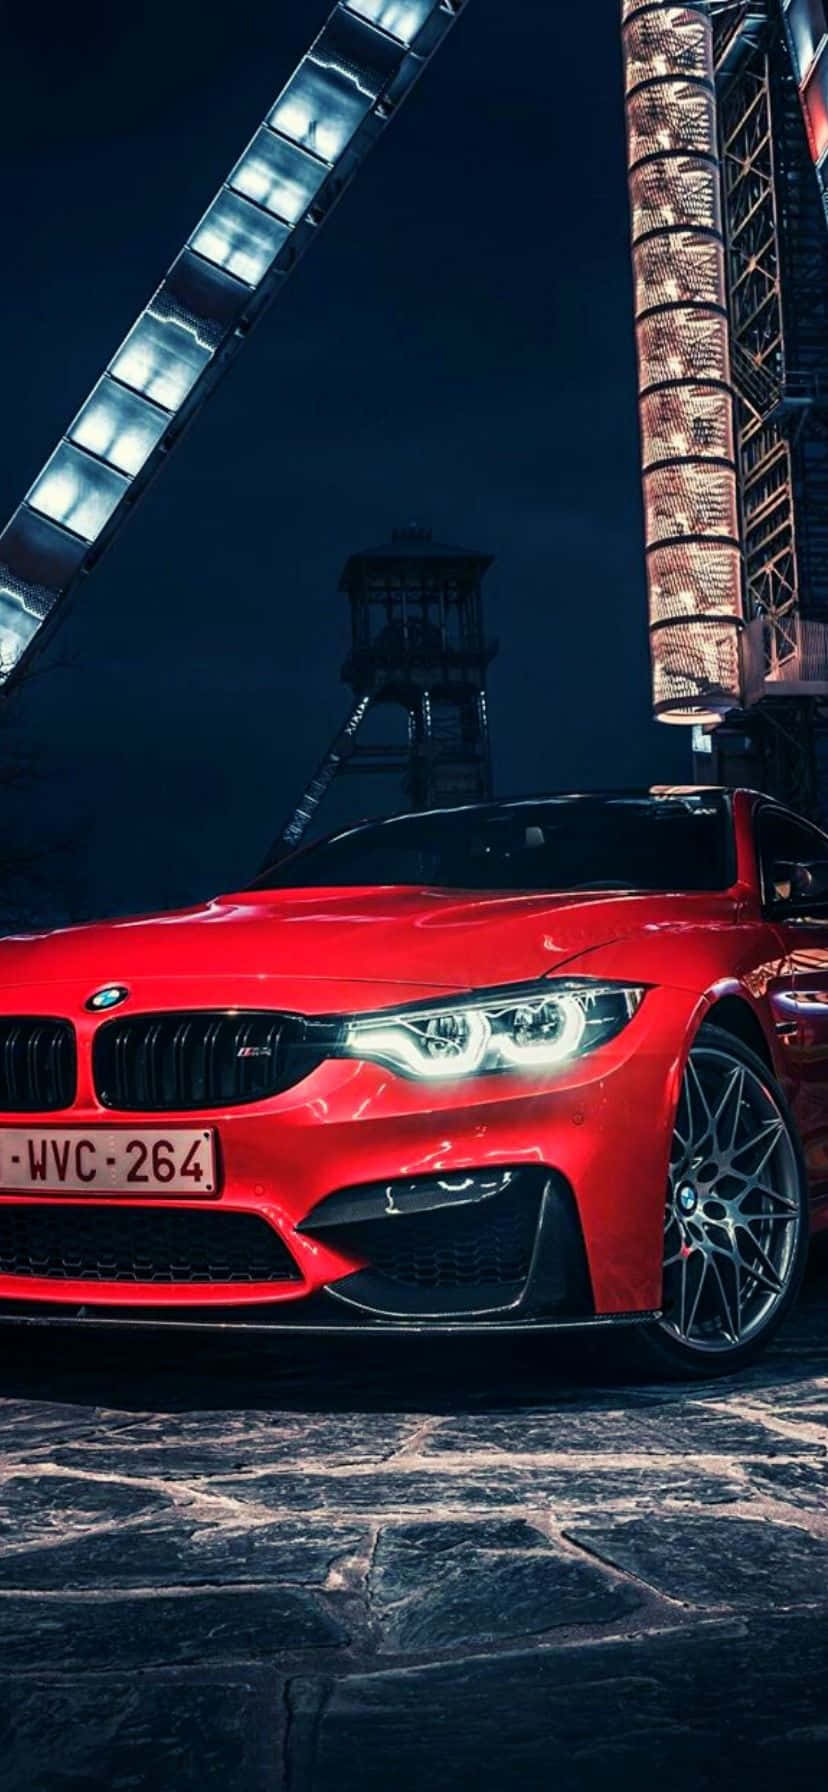 Upgrade Your Phone with a BMW M Wallpaper